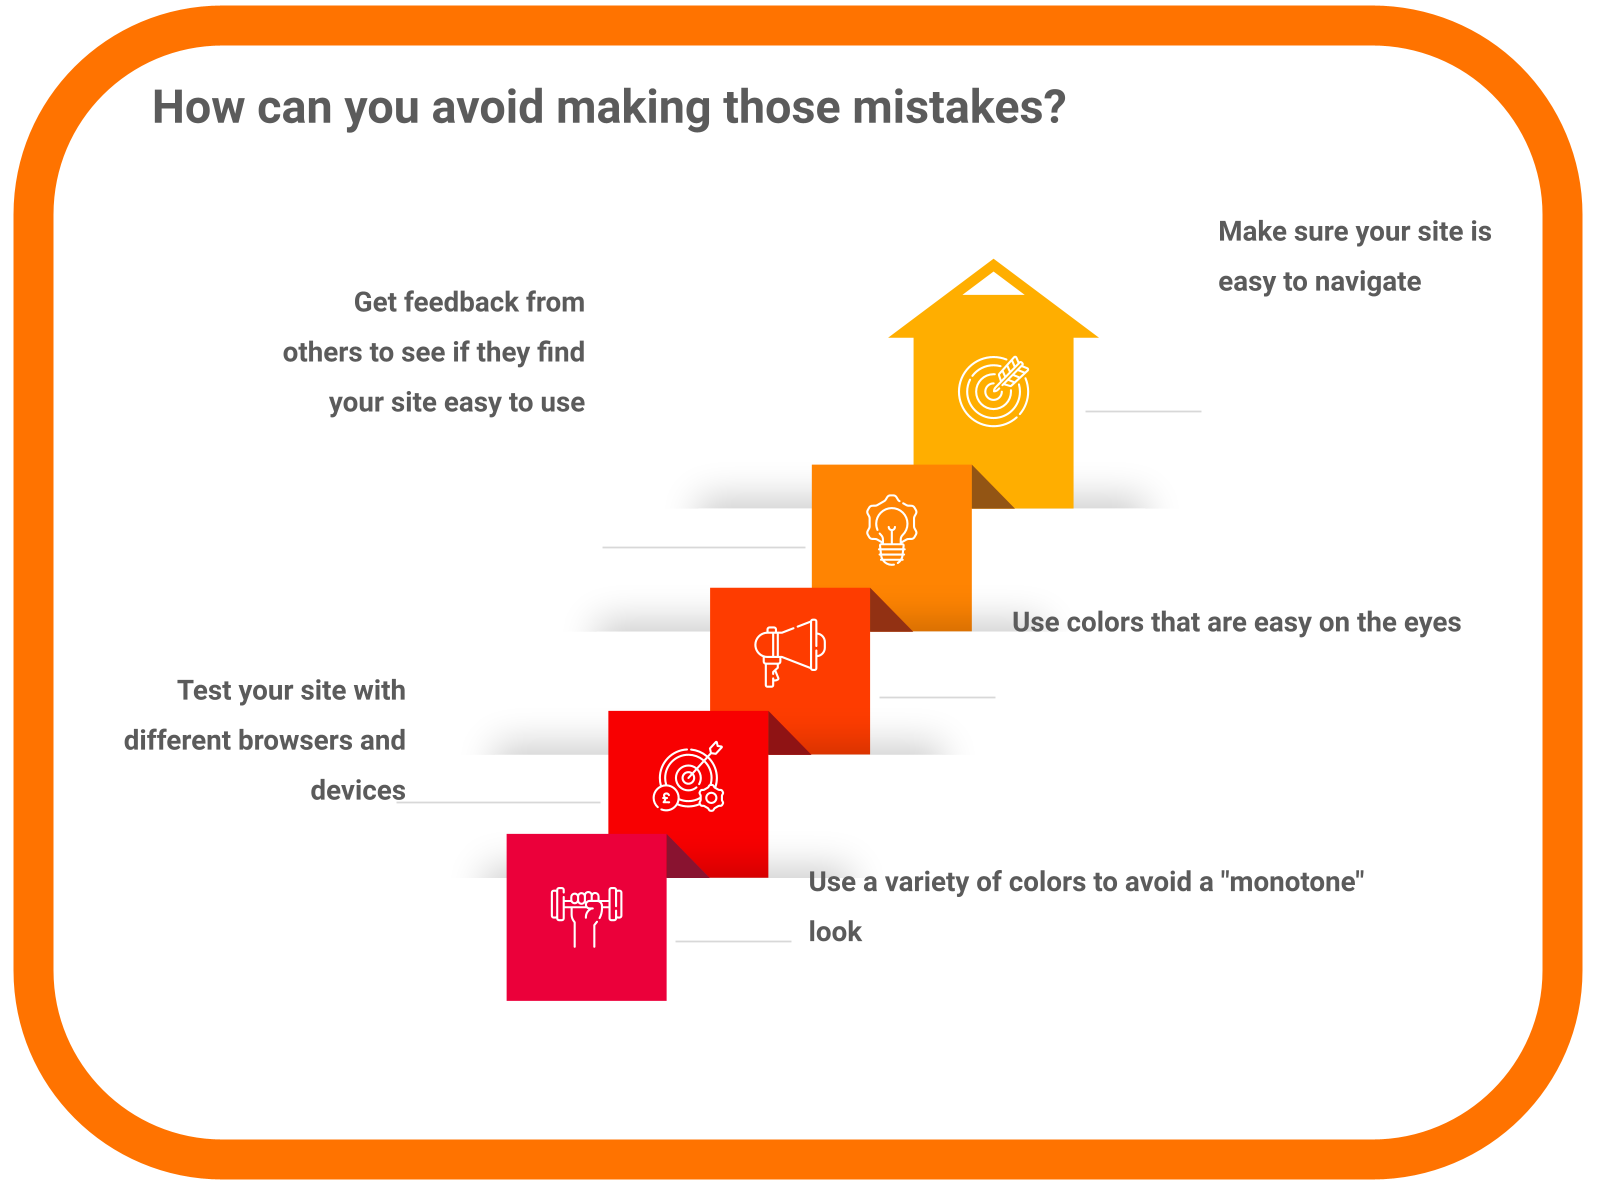 How can you avoid making those mistakes?